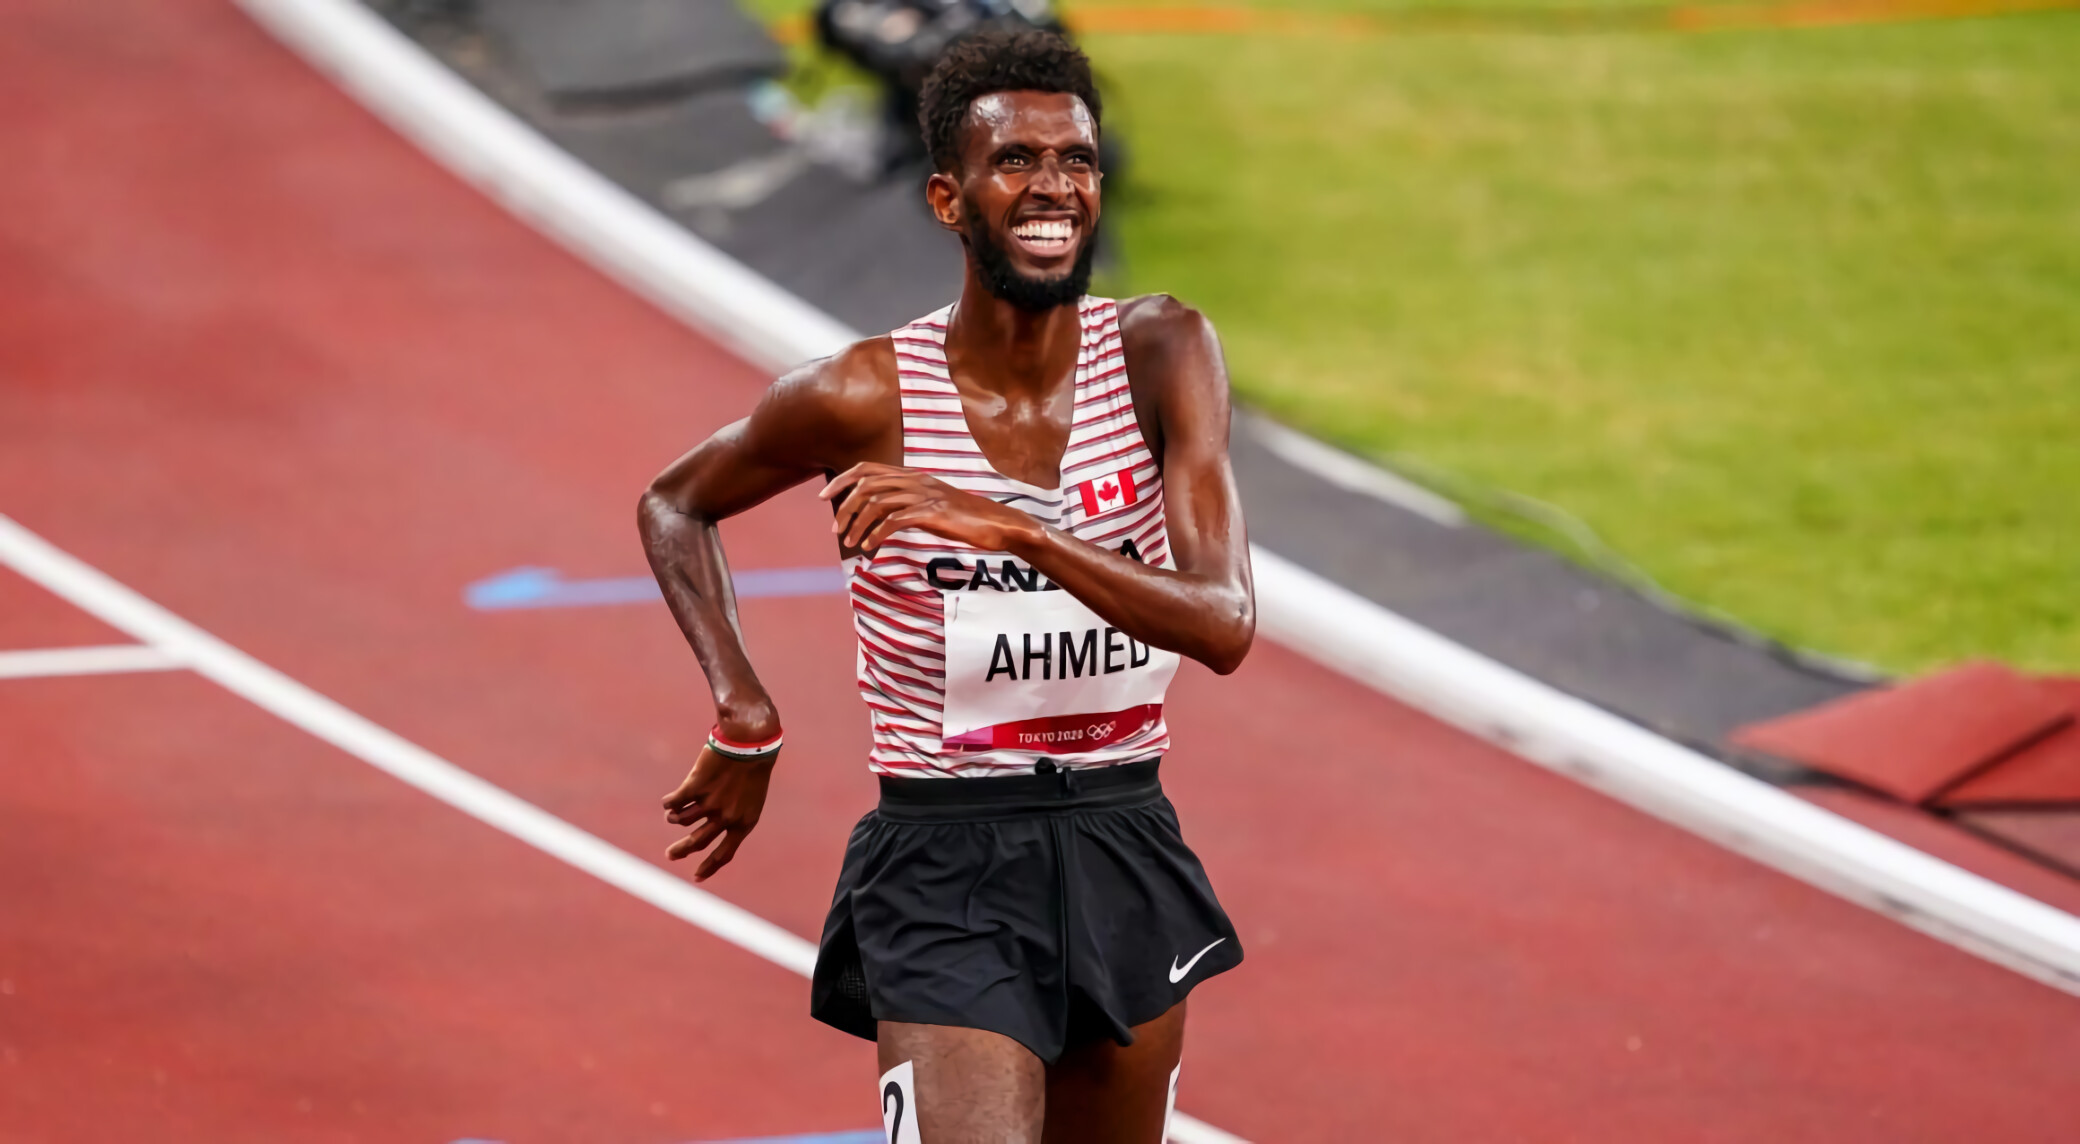 Mohammed Ahmed, Steeplechase technique, Athletic agility, Victory mindset, 2080x1150 HD Desktop